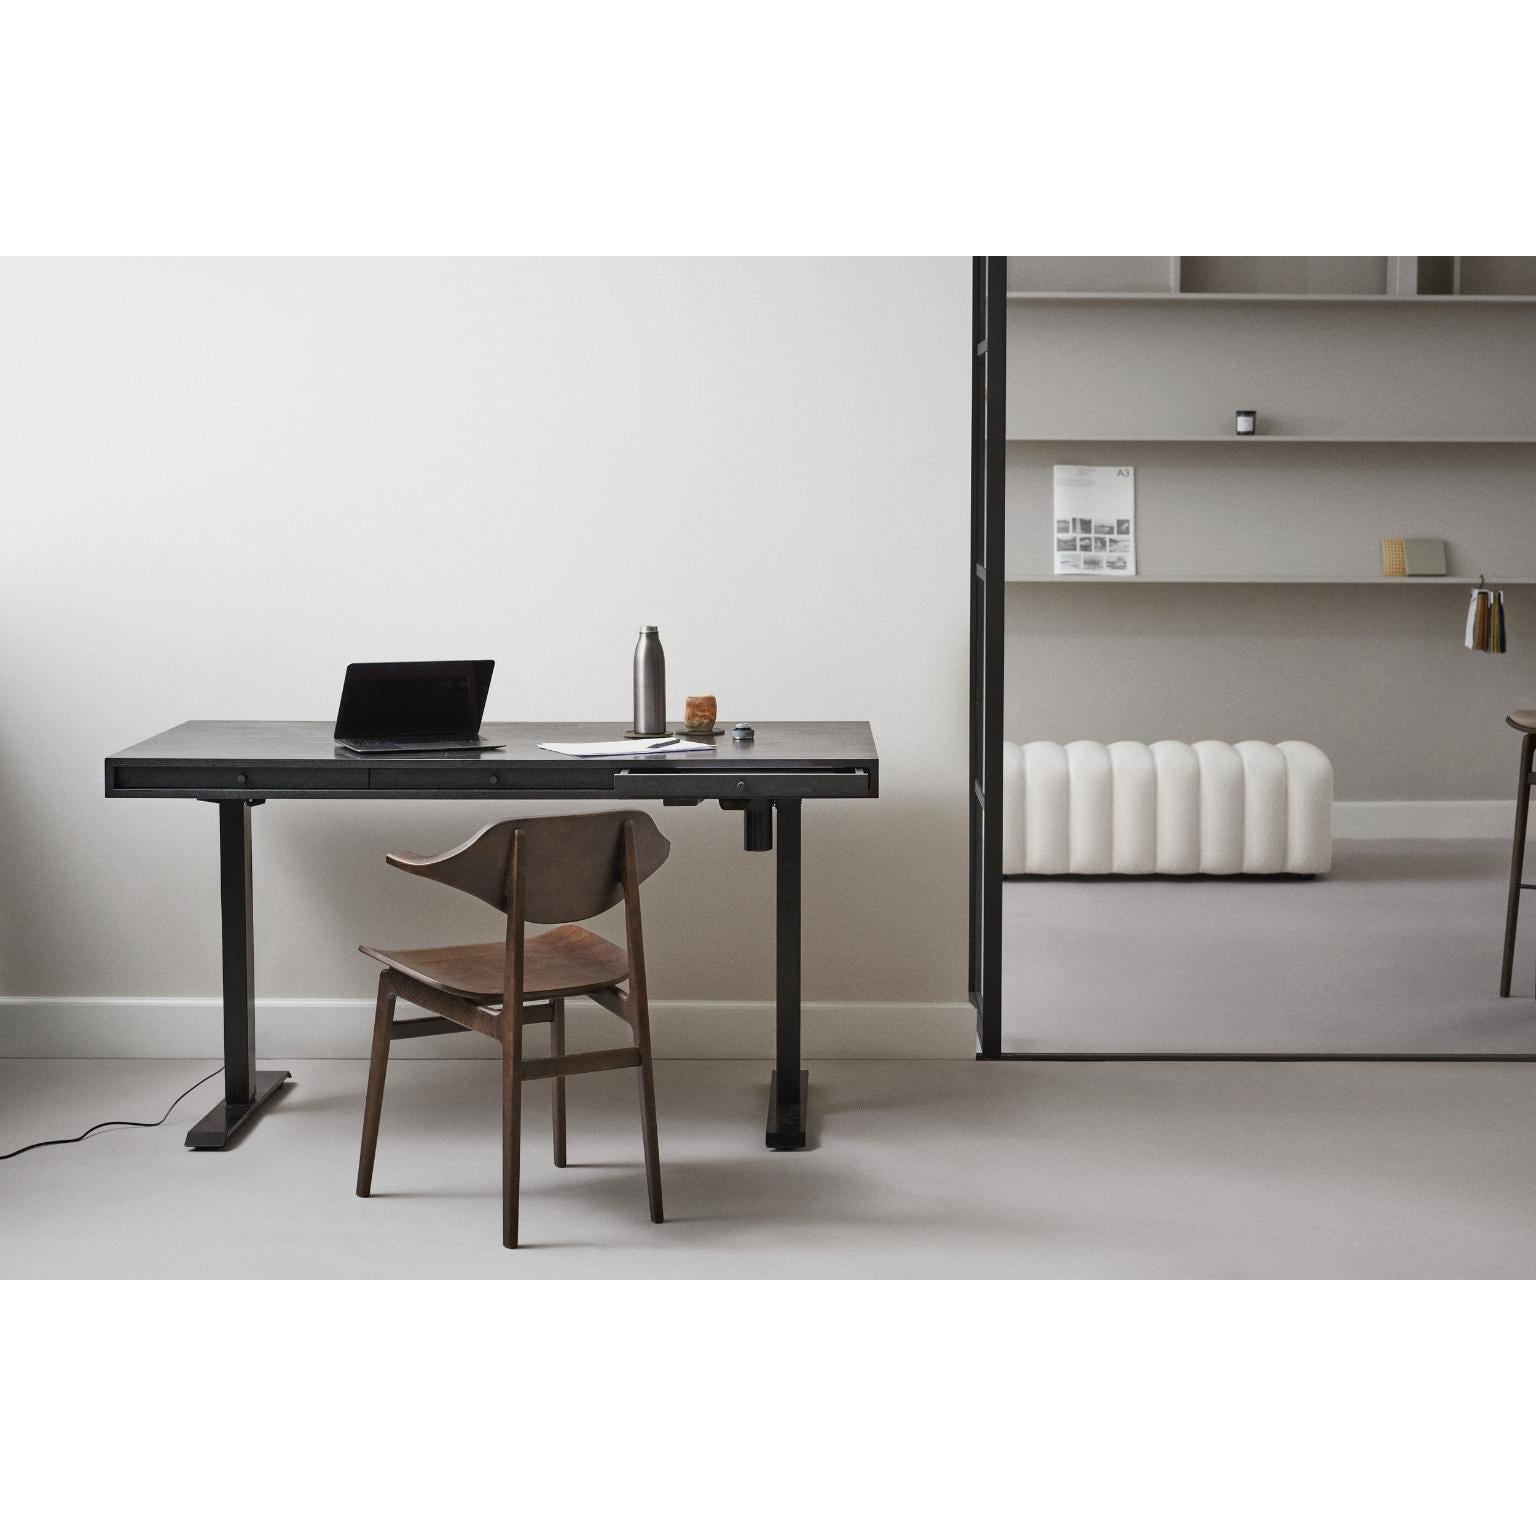 Aluminum JFK Office Desk With Adjustable Height Legs by NORR11